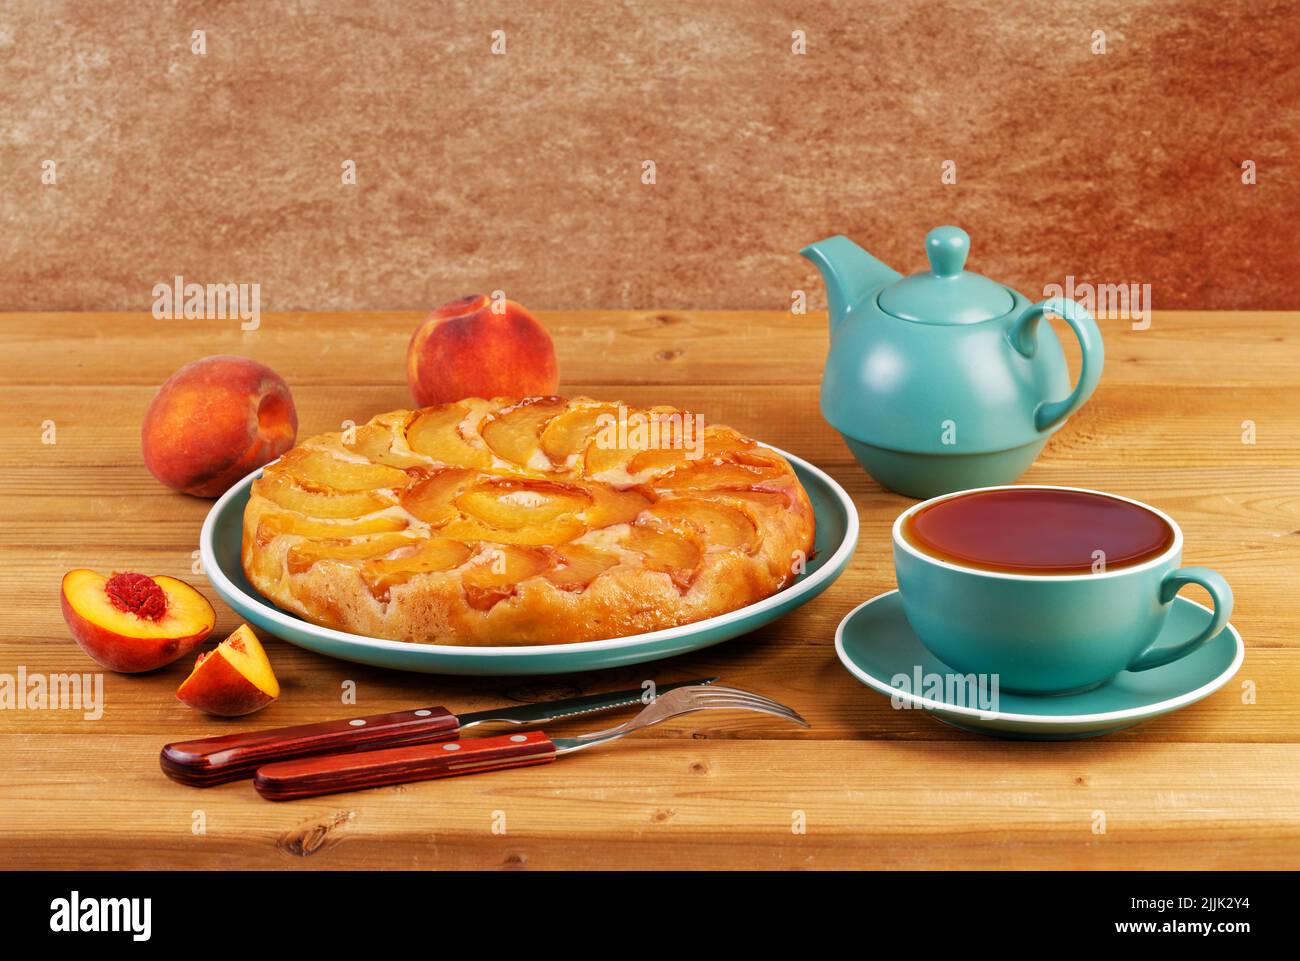 Homemade pie with peaches and cup of tea on wooden table. Copyspace. Stock Photo